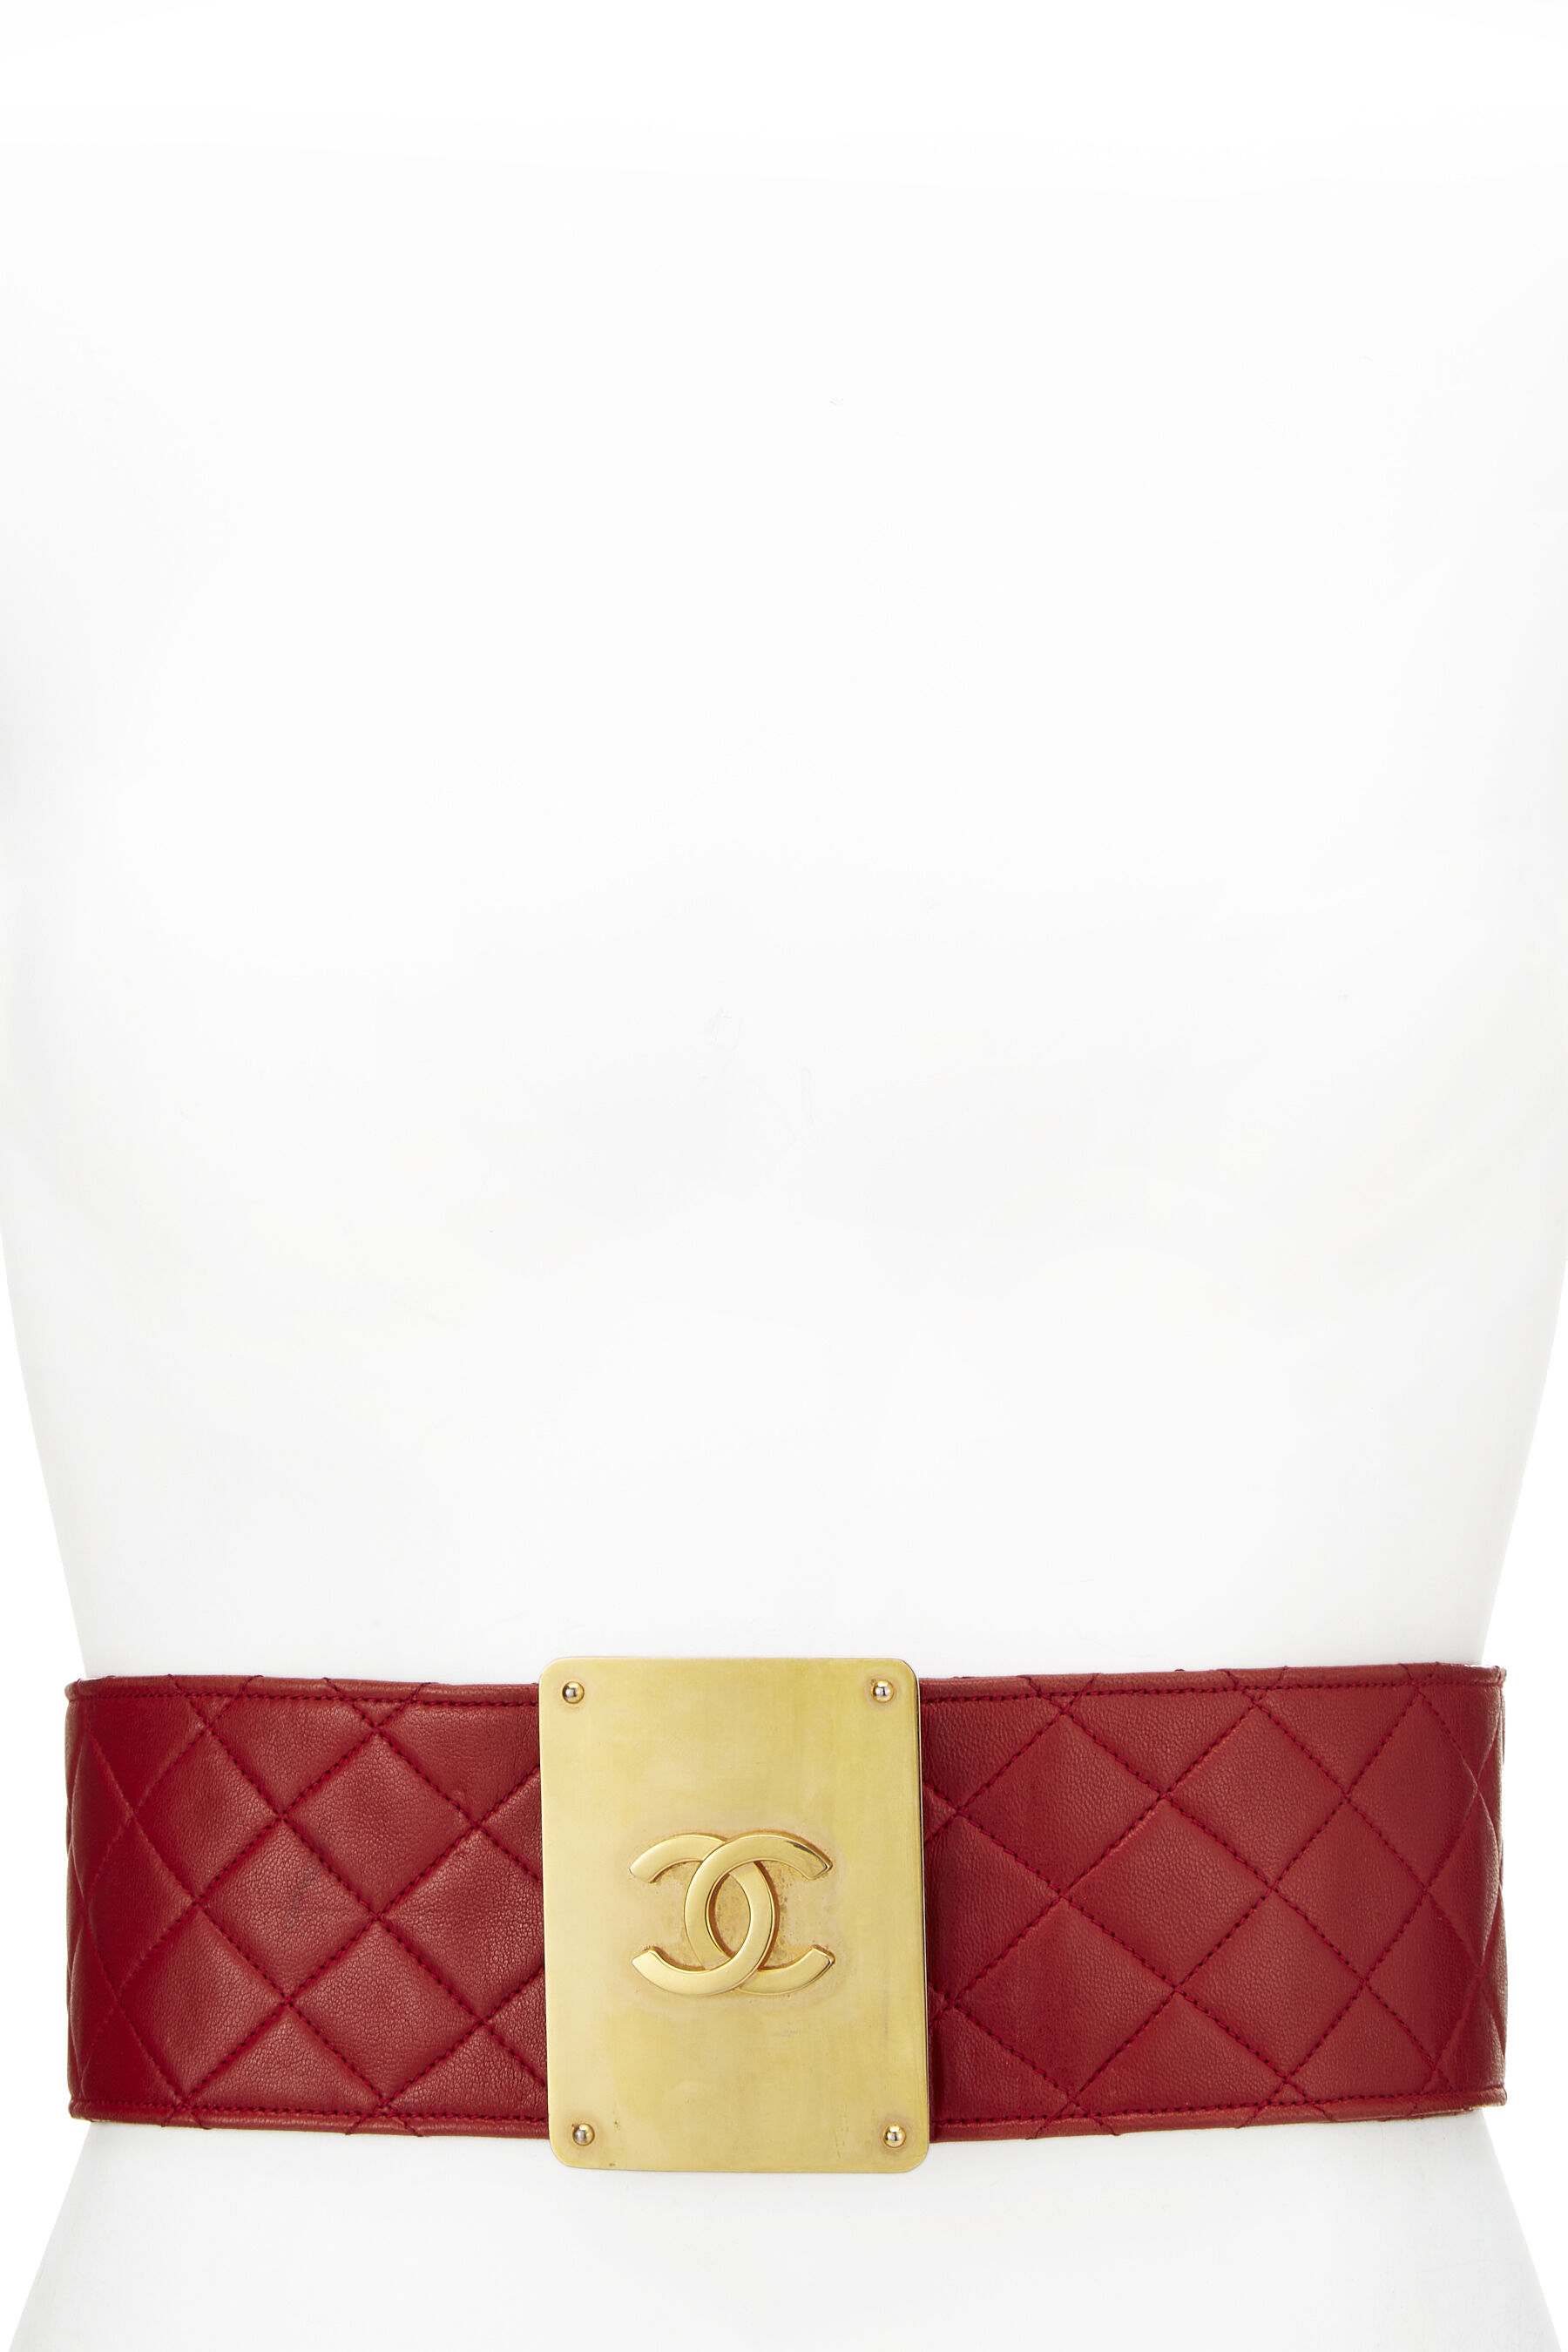 Chanel Red Quilted Leather 'CC' Buckle Belt 70 Q6A4J31LRB000